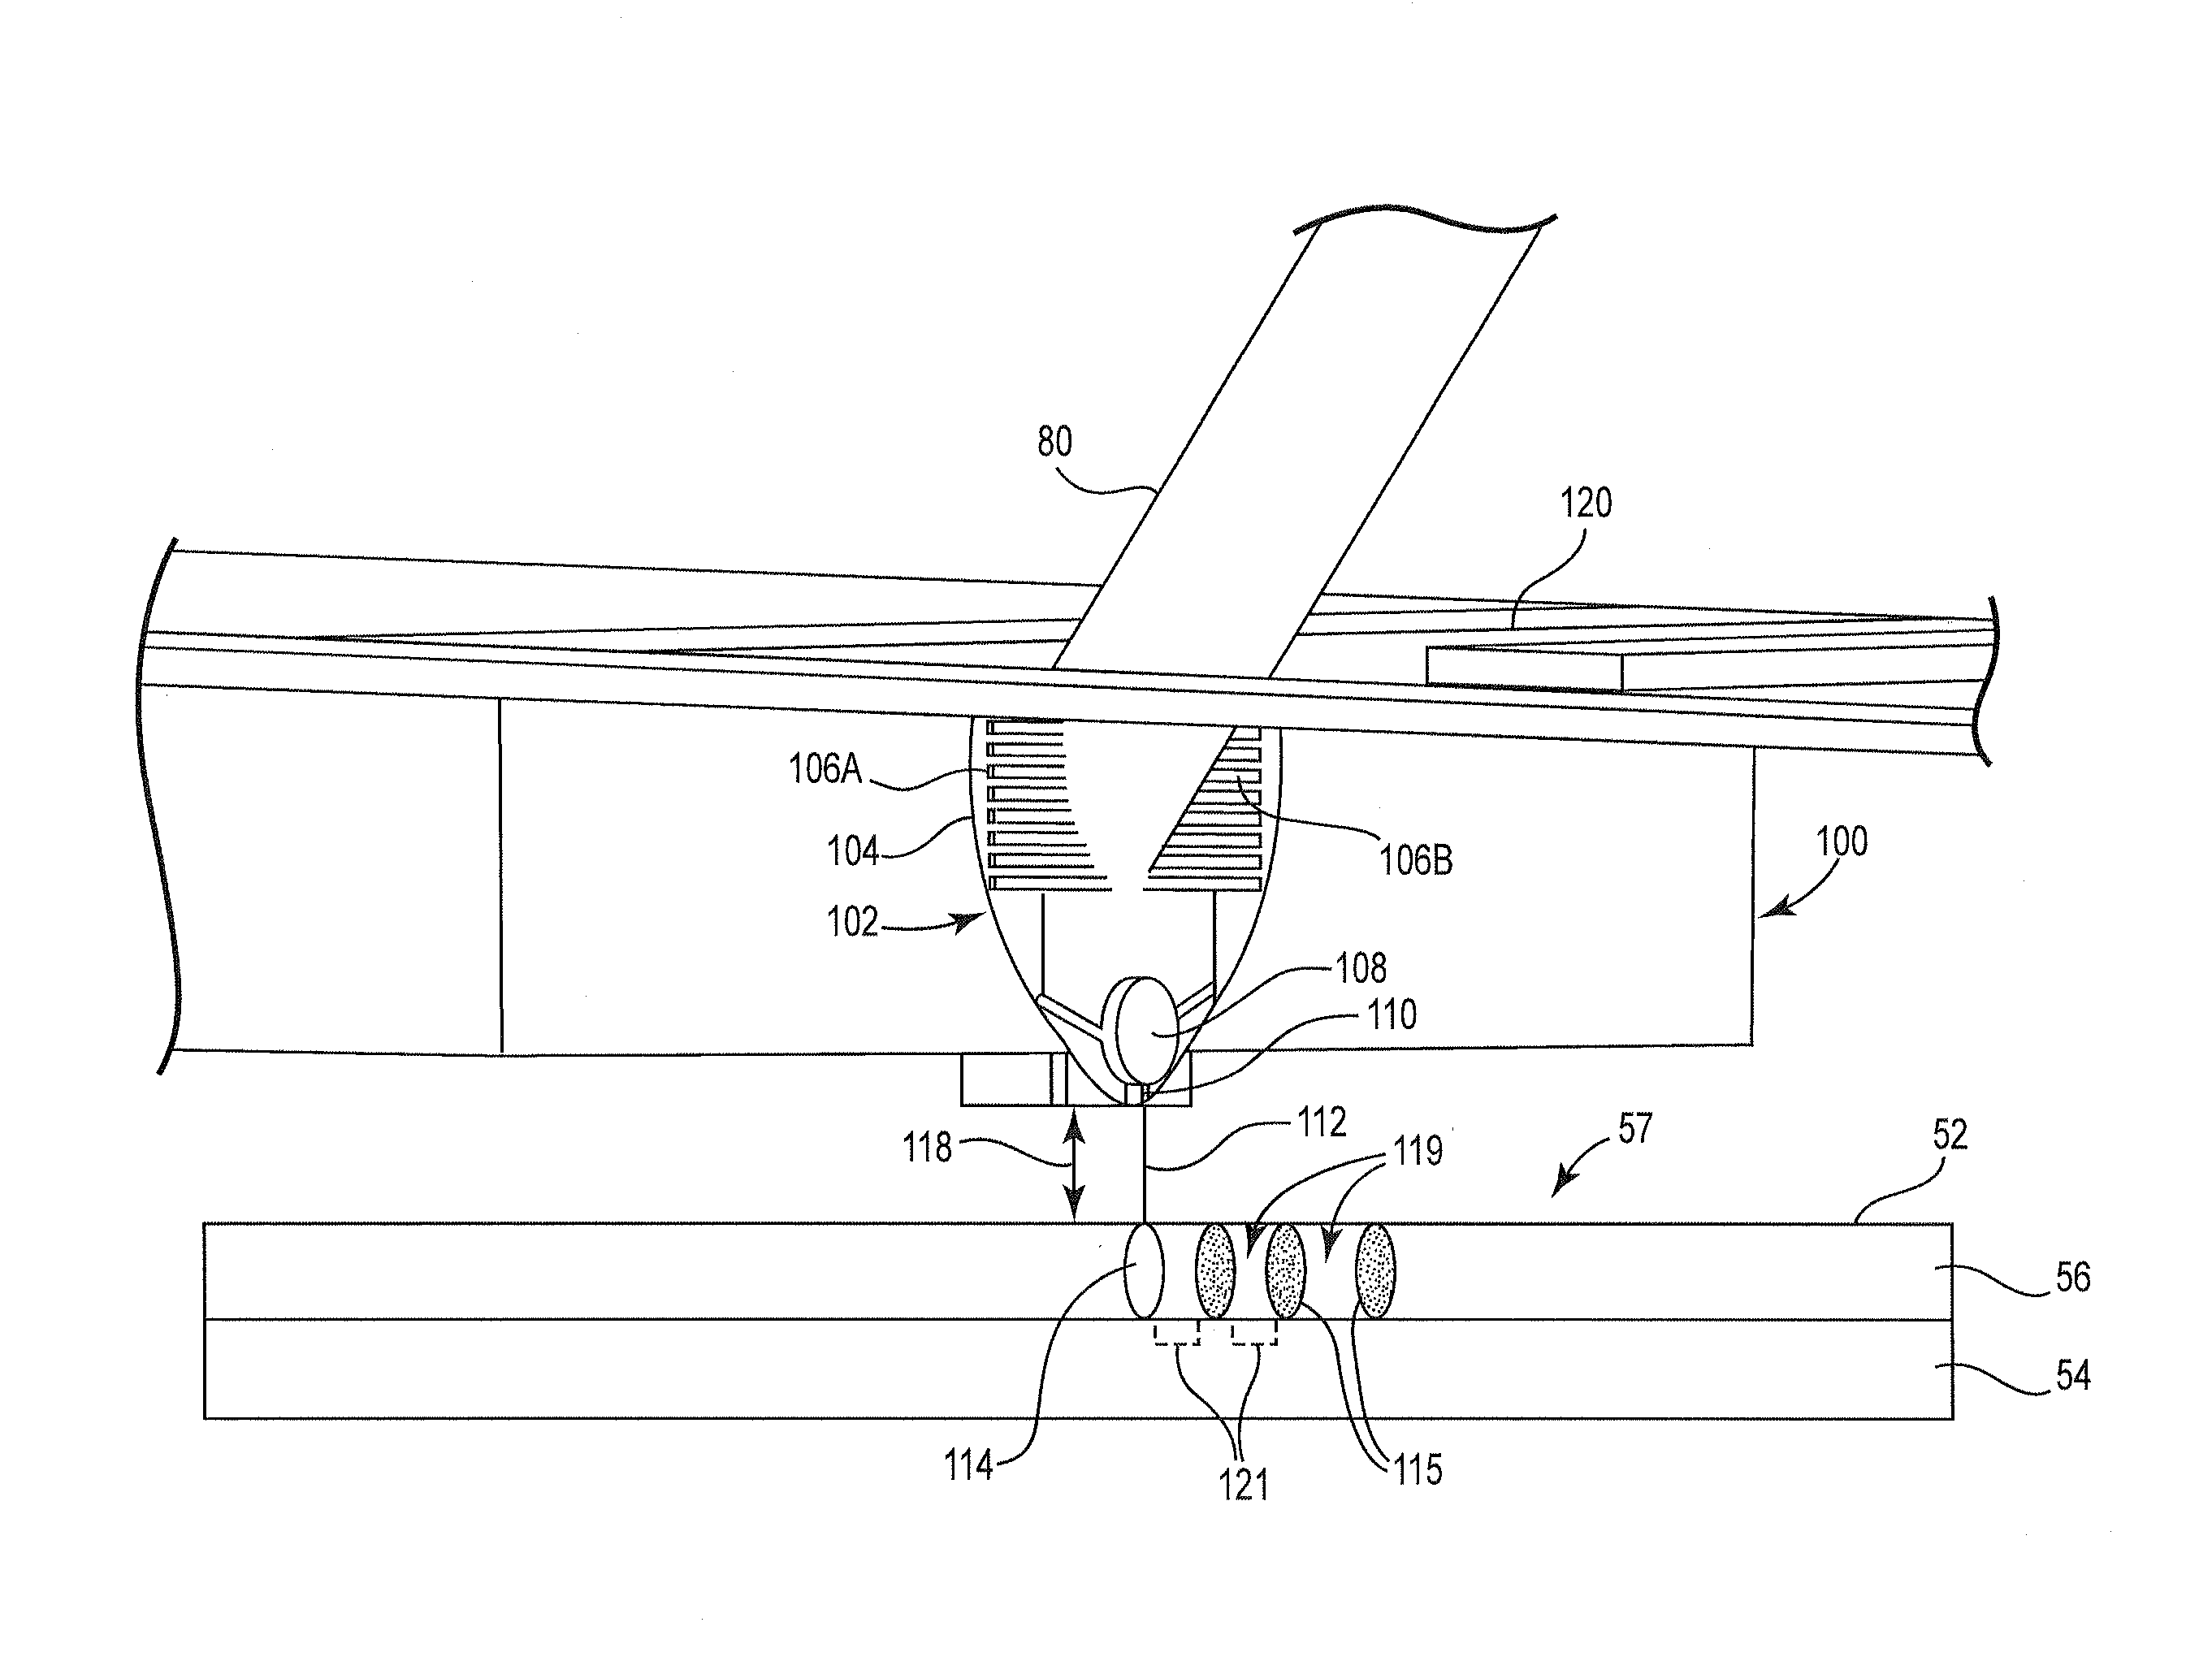 Plasmon head with hydrostatic gas bearing for near field photolithography